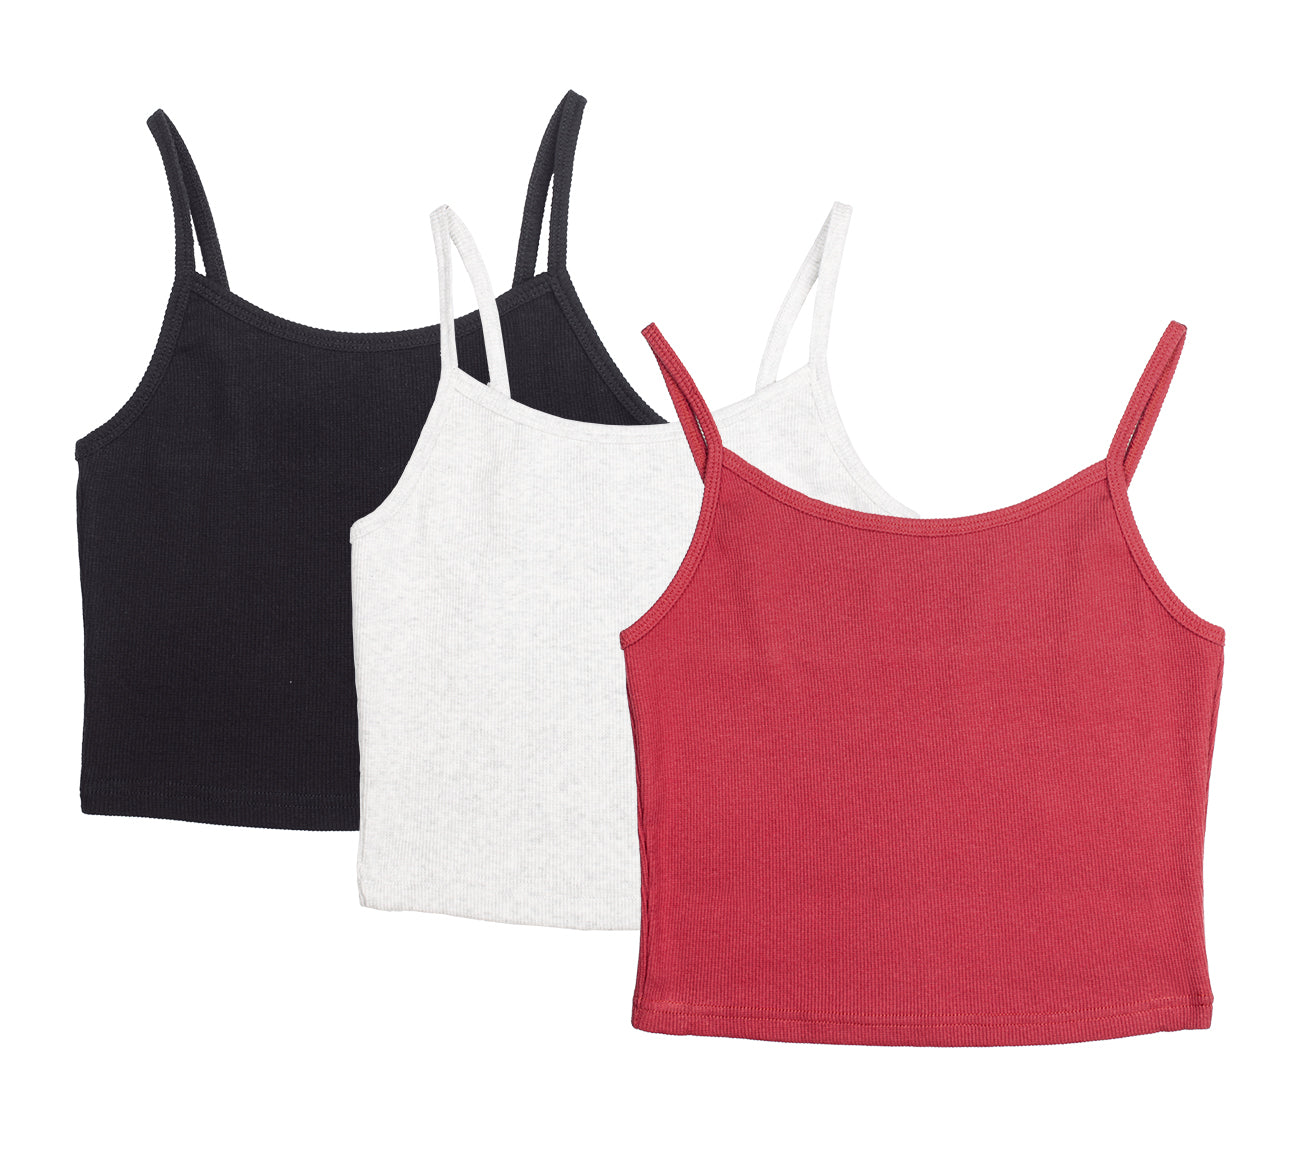 Women's Sleeveless Vest Ribbed Knit Crop Tank Top Spaghetti Strap Camisole